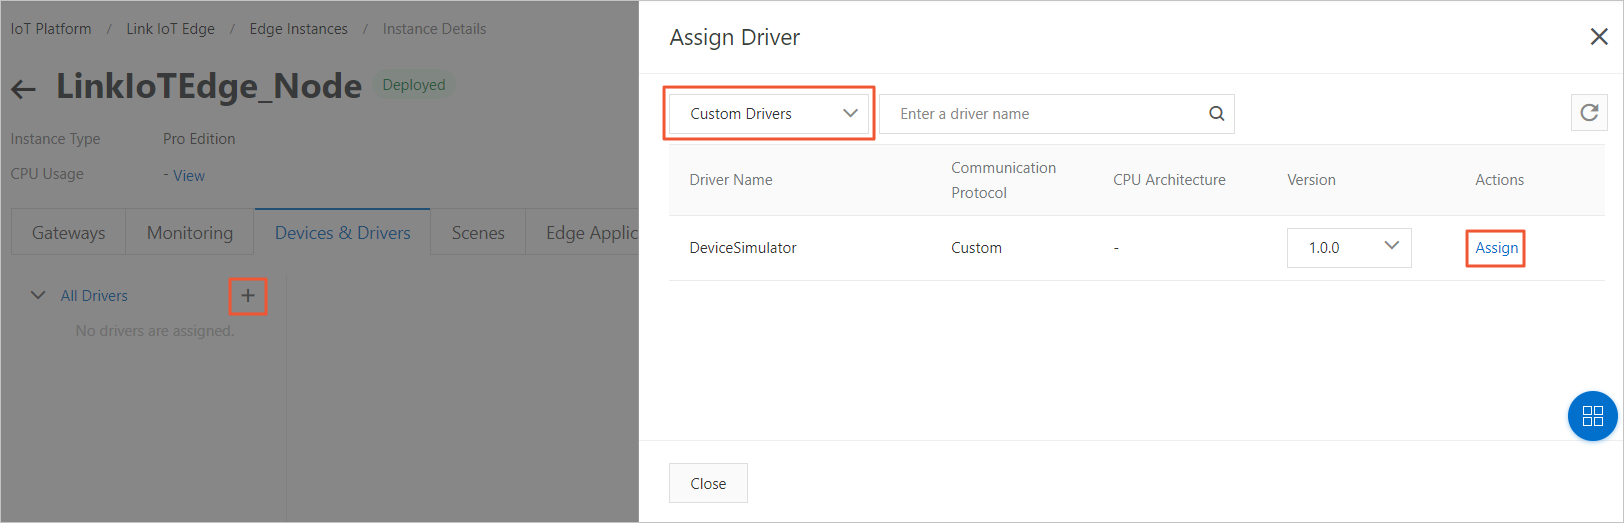 Assign the driver to the edge instance